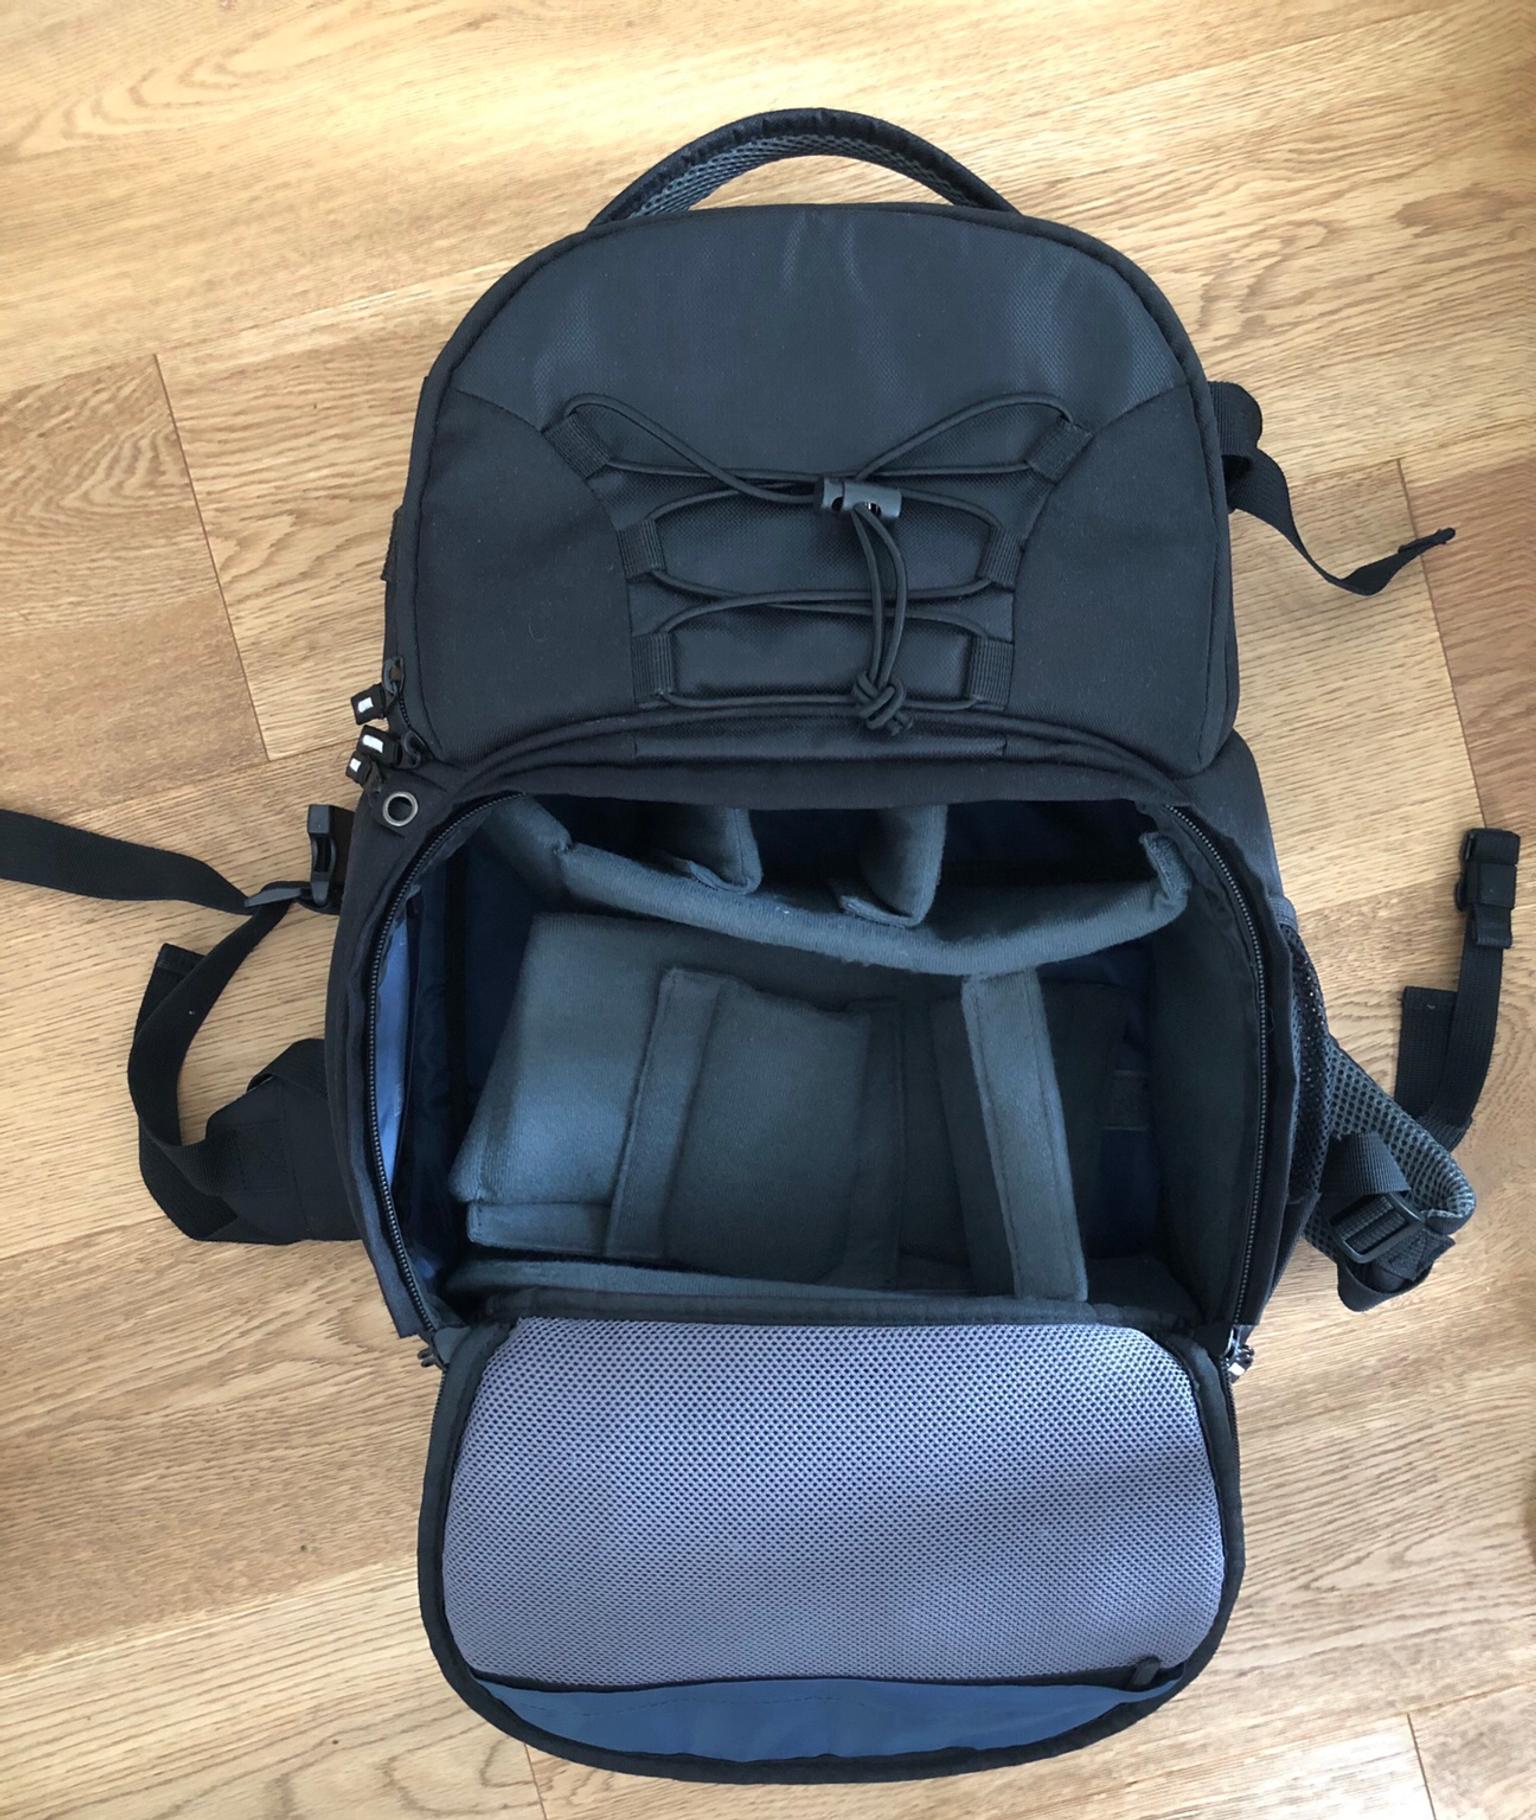 Cullmann Camera Backpack in N7 Islington for £36.00 for sale | Shpock